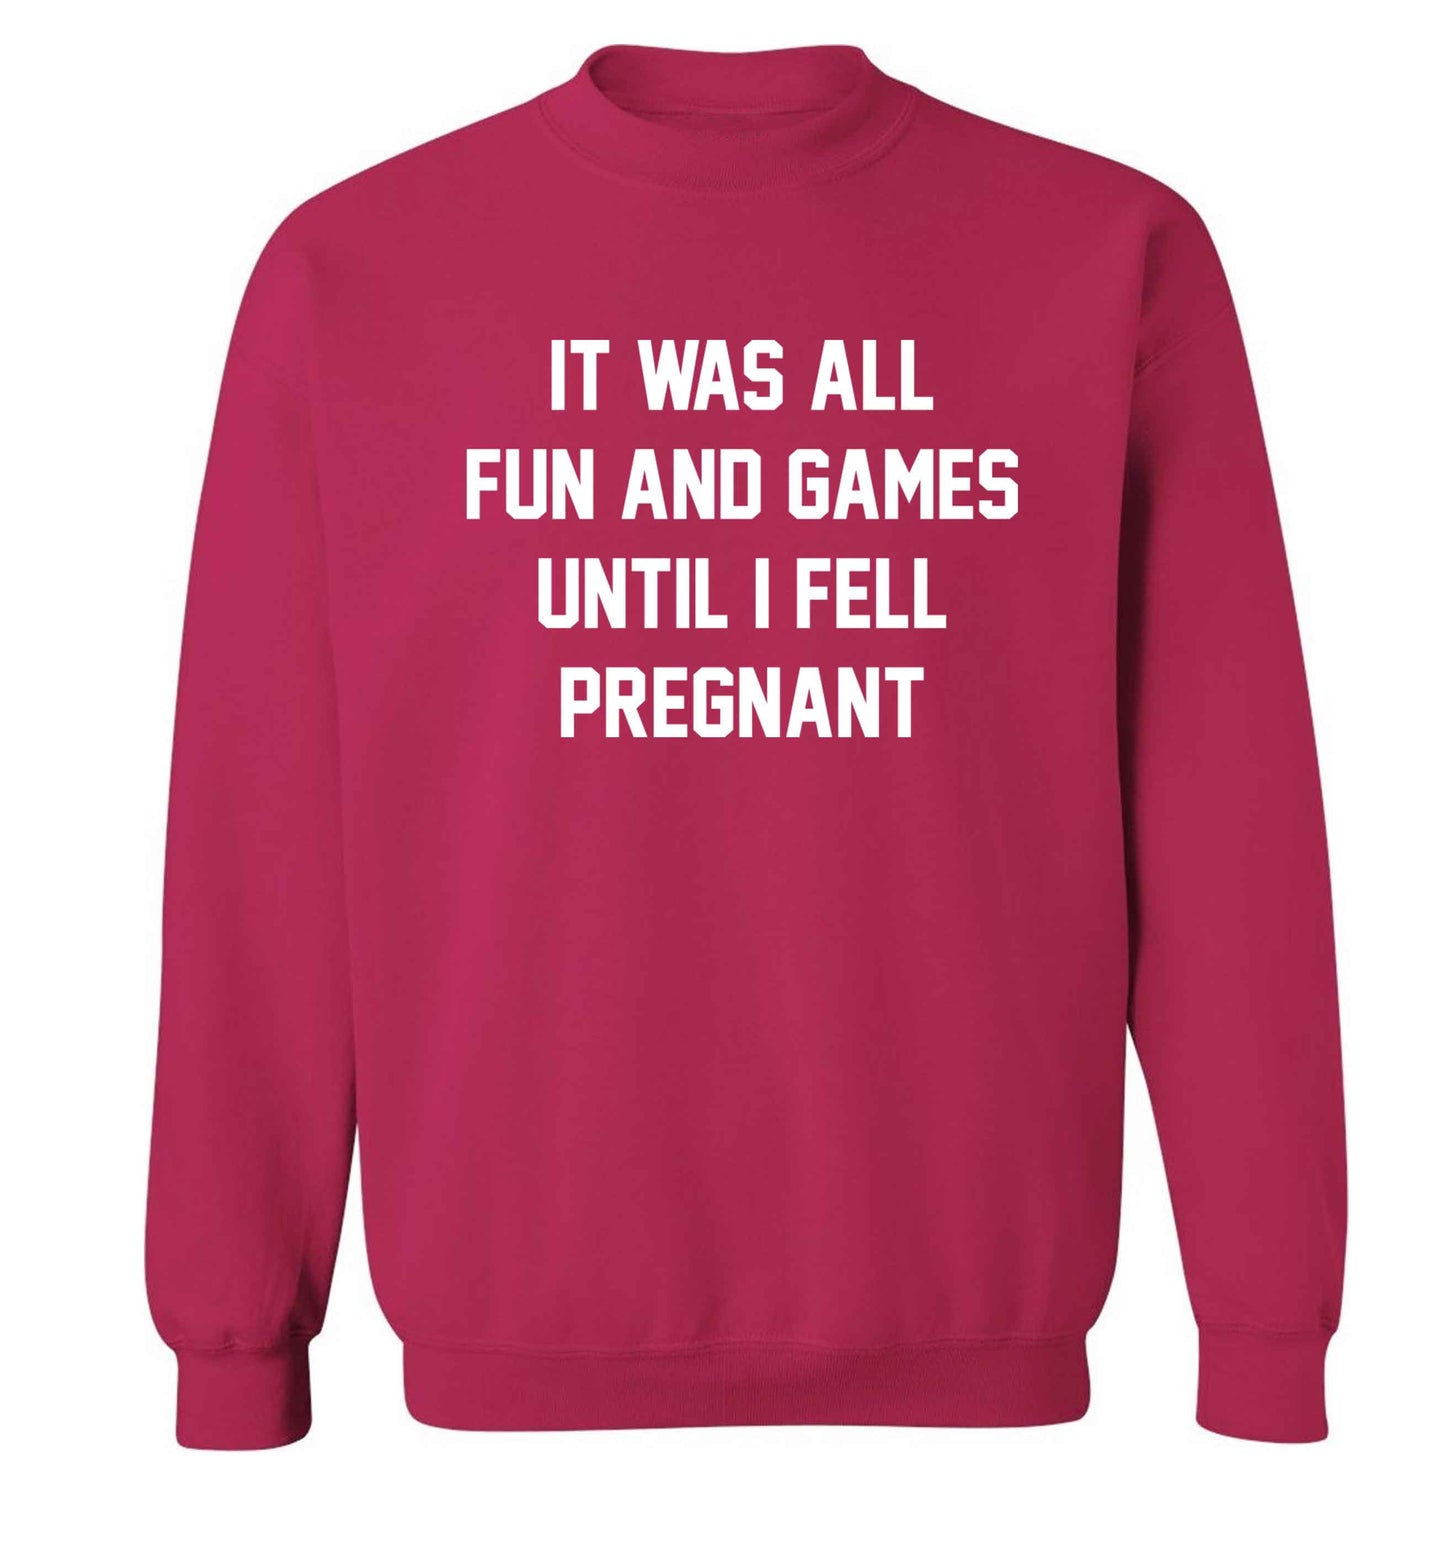 It was all fun and games until I fell pregnant kicks Adult's unisex pink Sweater 2XL